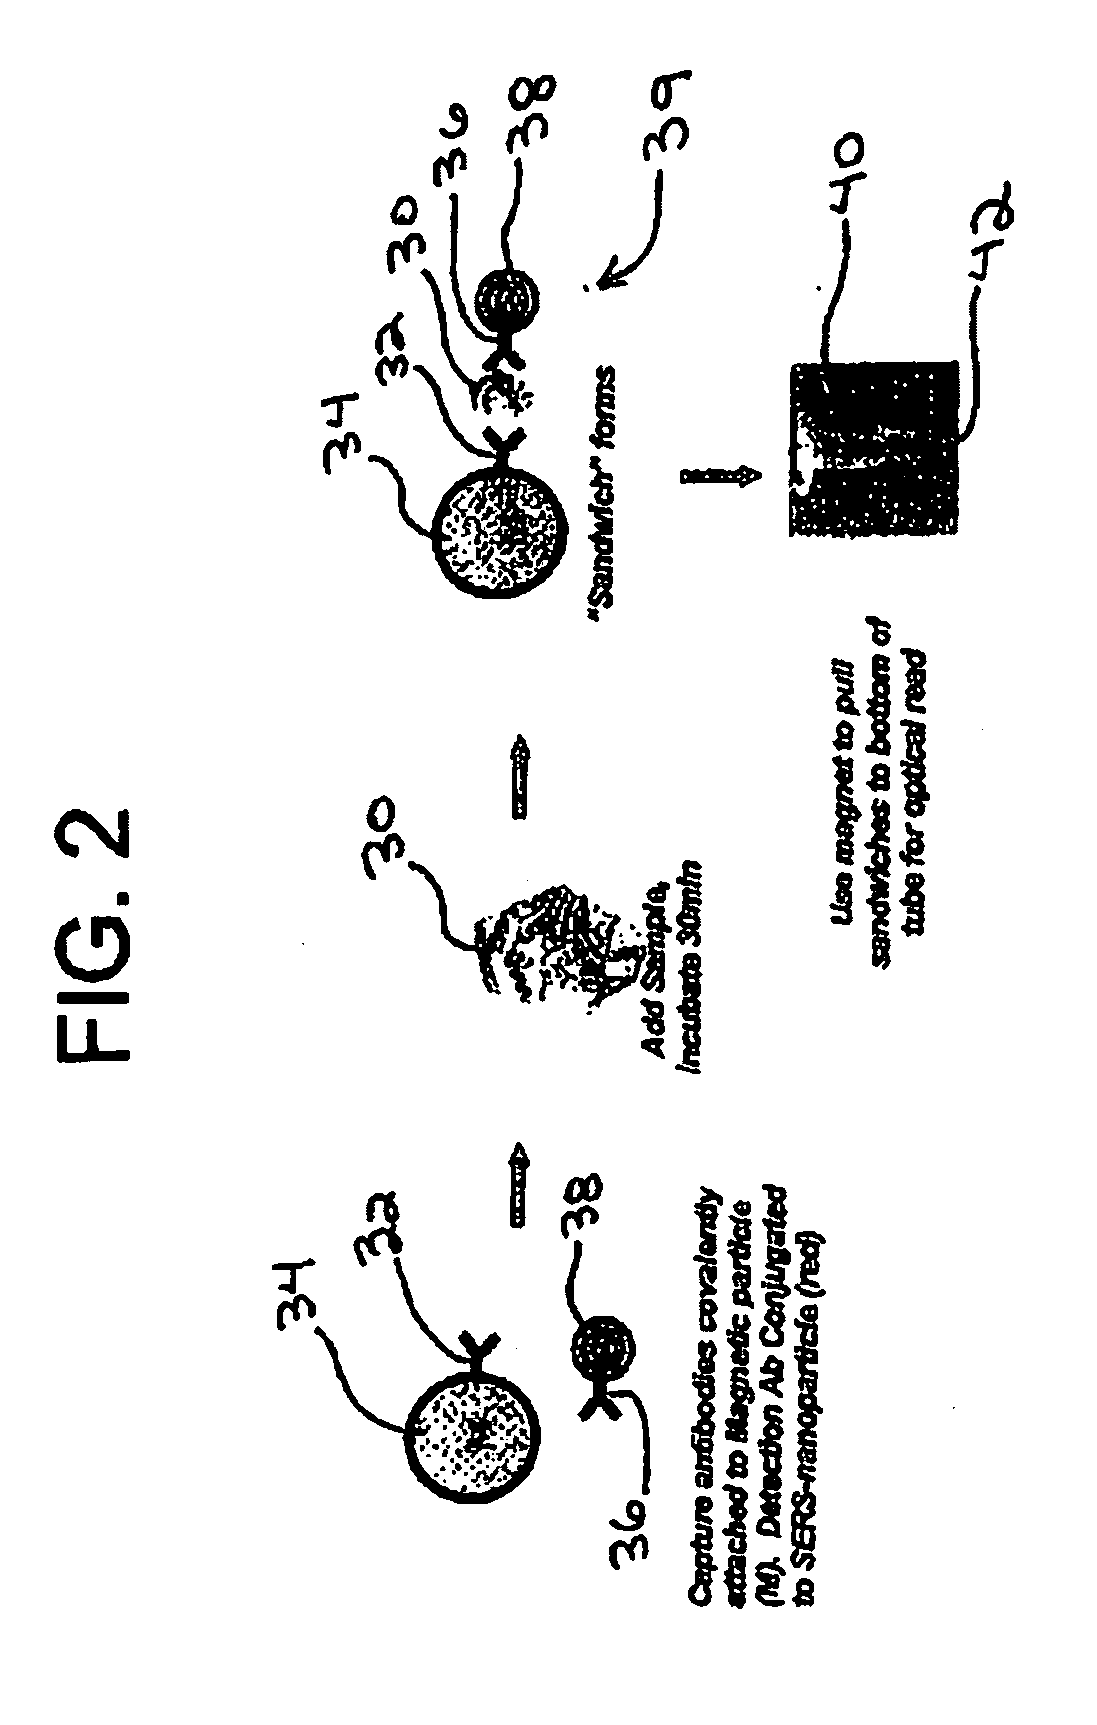 Methods of controlling the sensitivity and dynamic range of a homogeneous assay